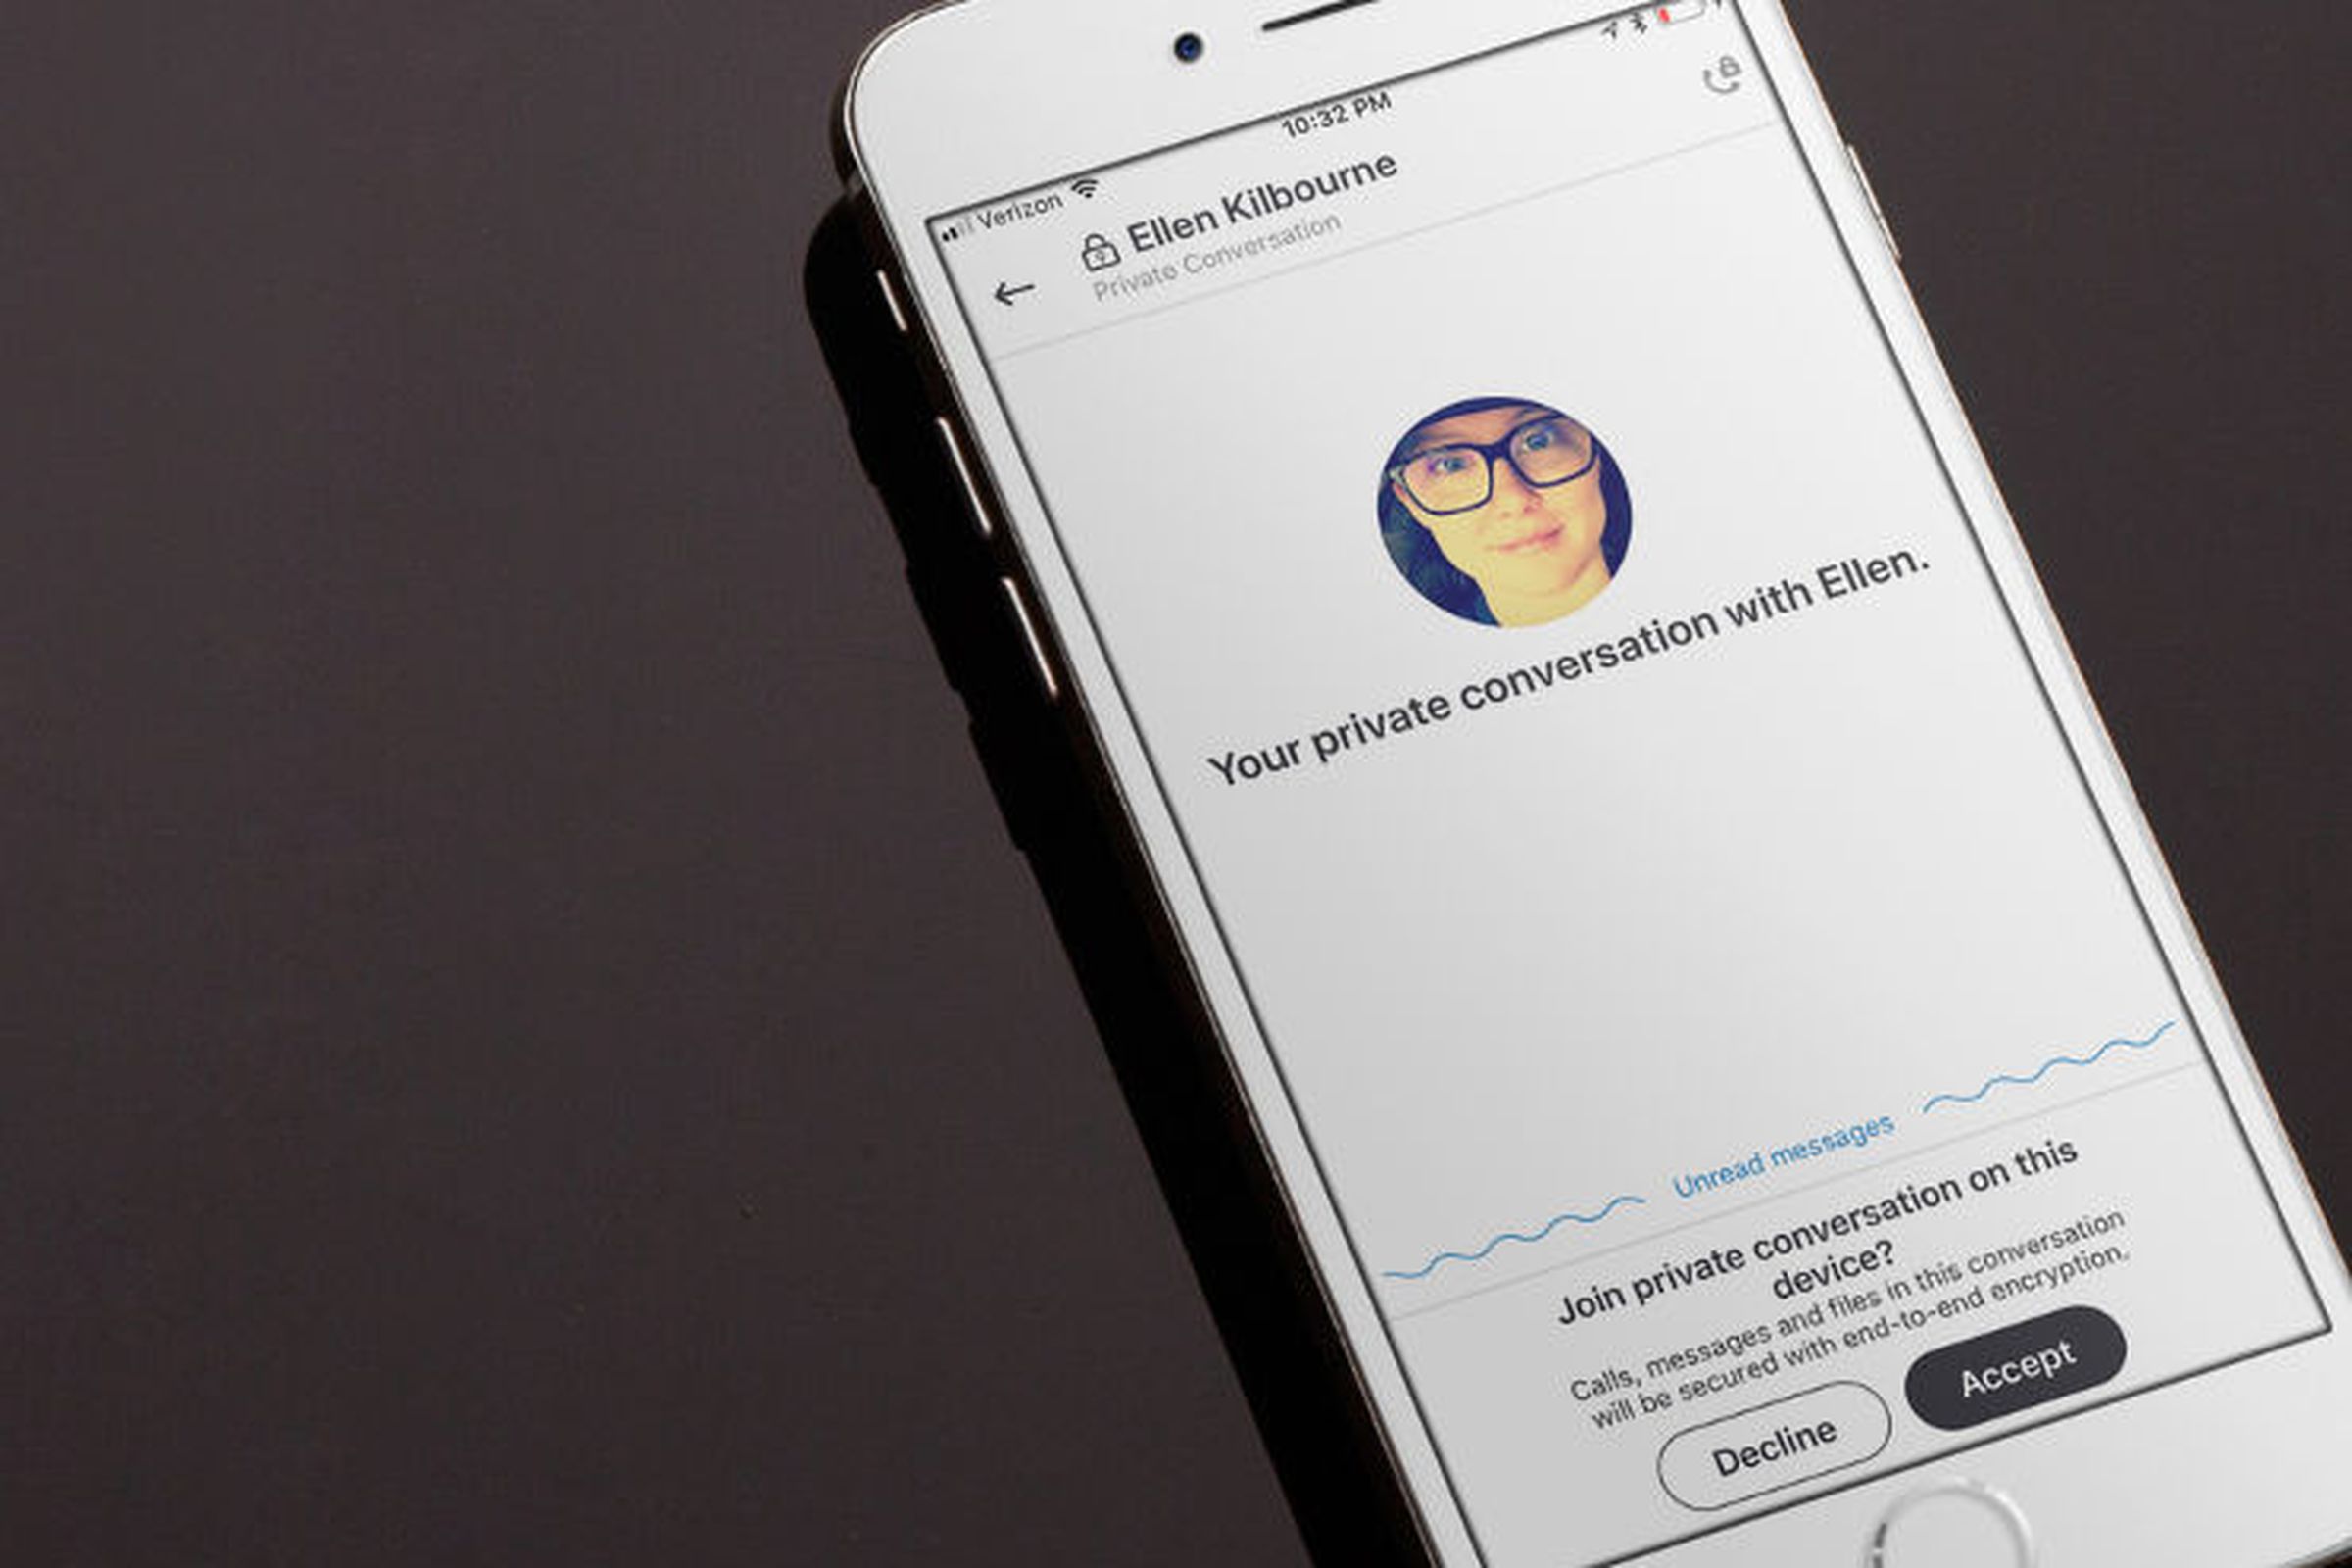 Skype now offers end-to-end encrypted conversations - The Verge